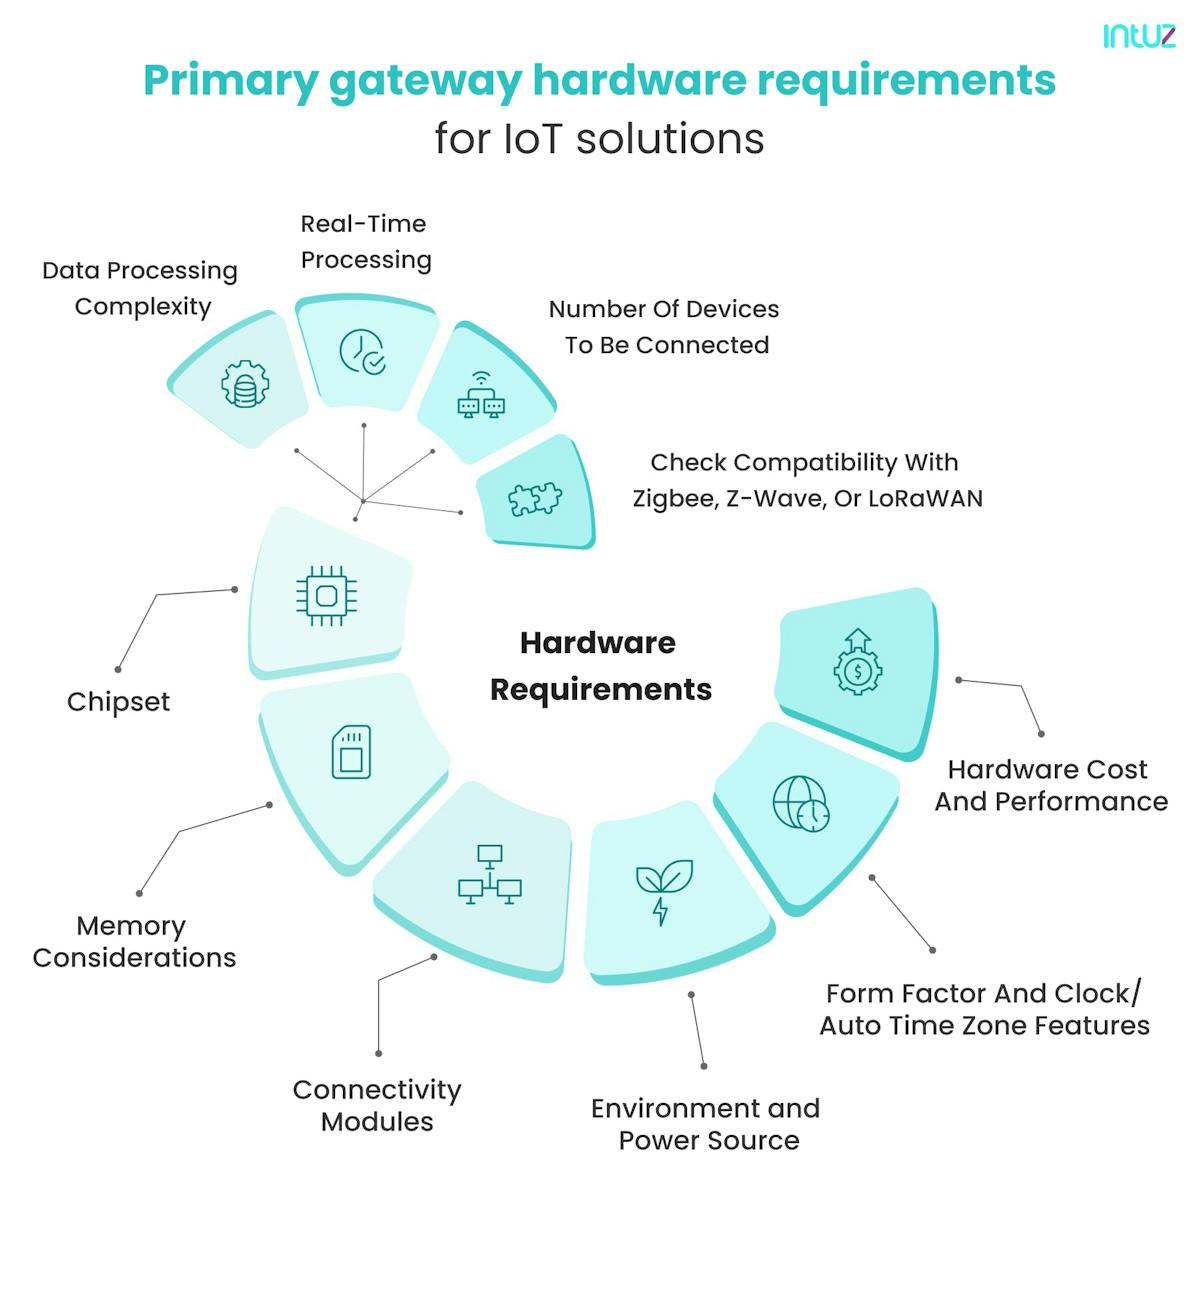 Primary gateway hardware requirement for iot solution